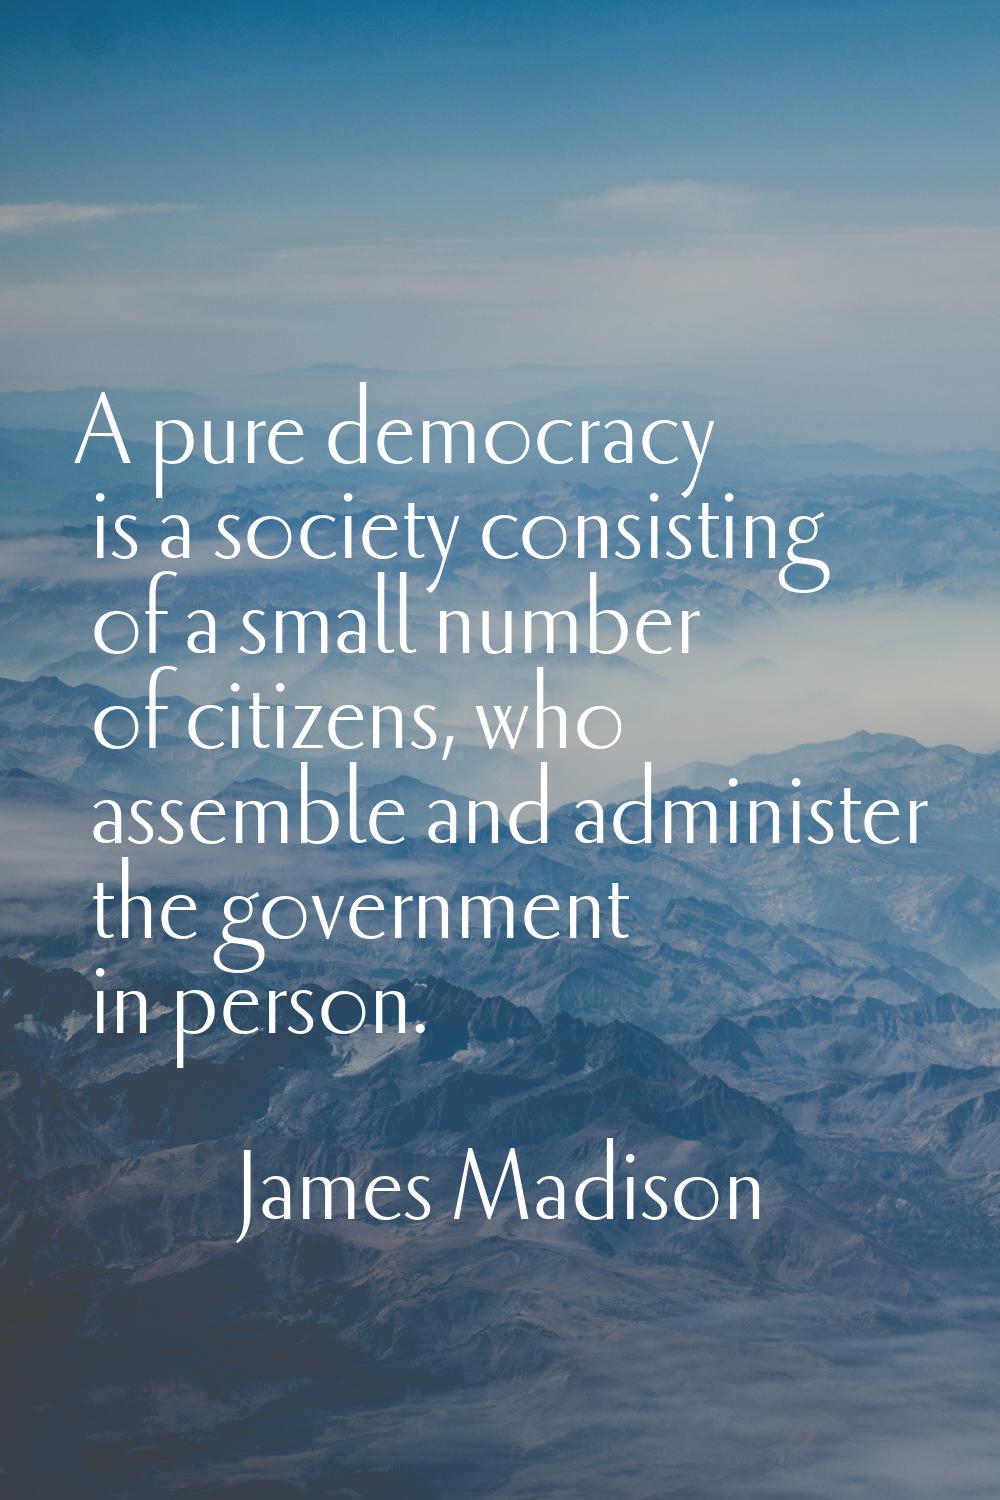 A pure democracy is a society consisting of a small number of citizens, who assemble and administer